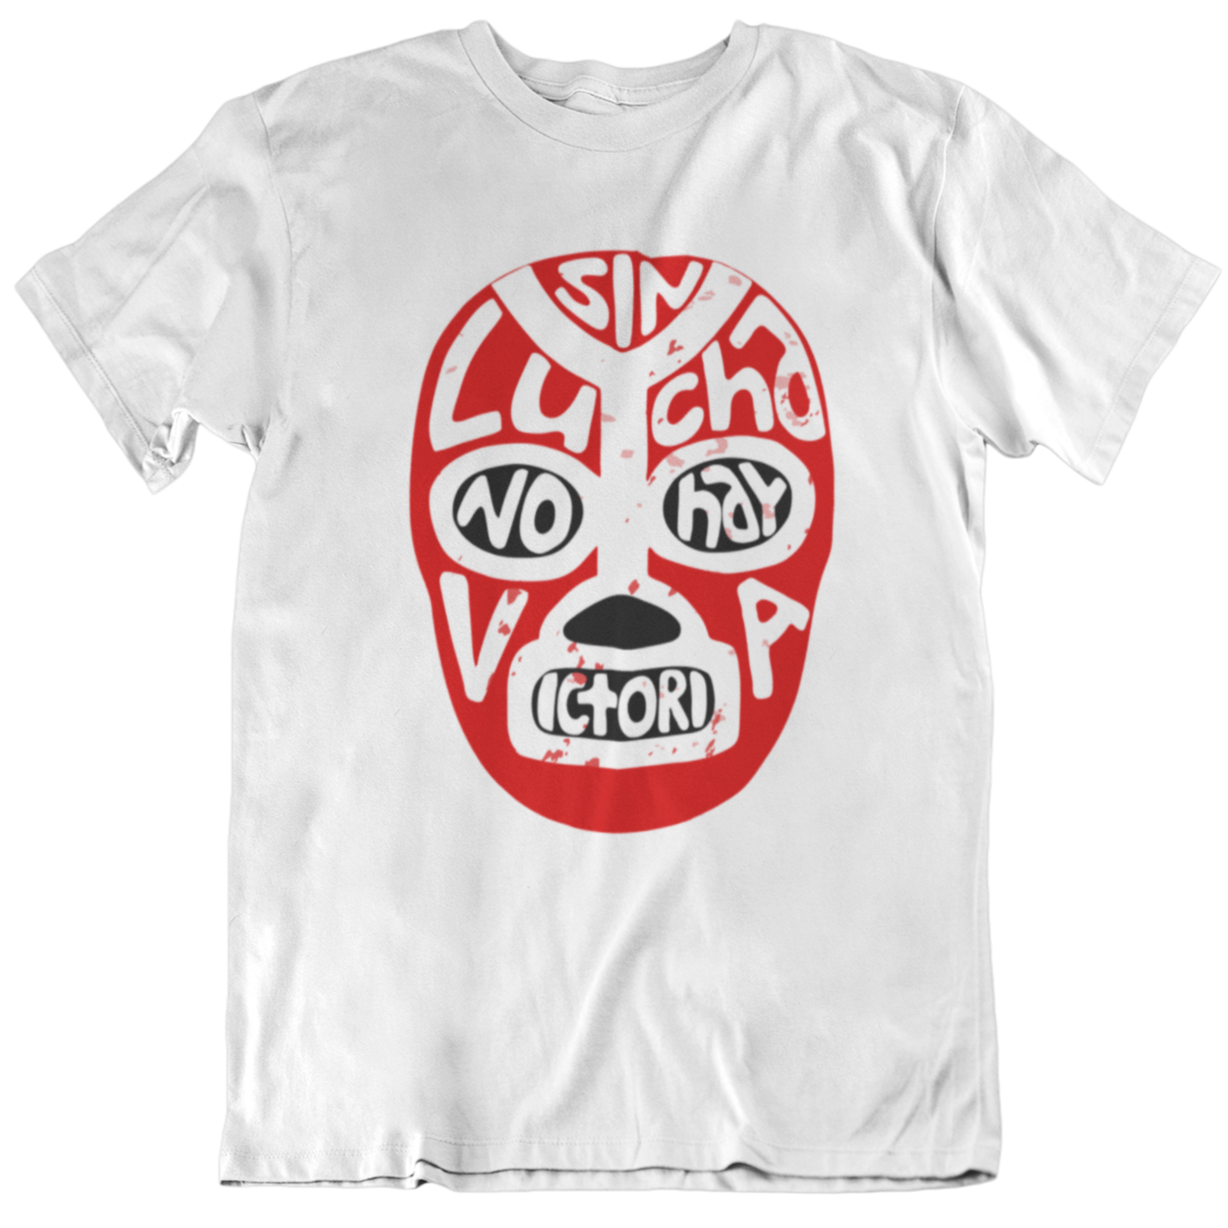 Funny and empowering Latino white t-shirt for Spanish speakers. the graphic is tattoo-style lucha Libra mask. the text on the mask states "sin lucha, no hay Victoria"